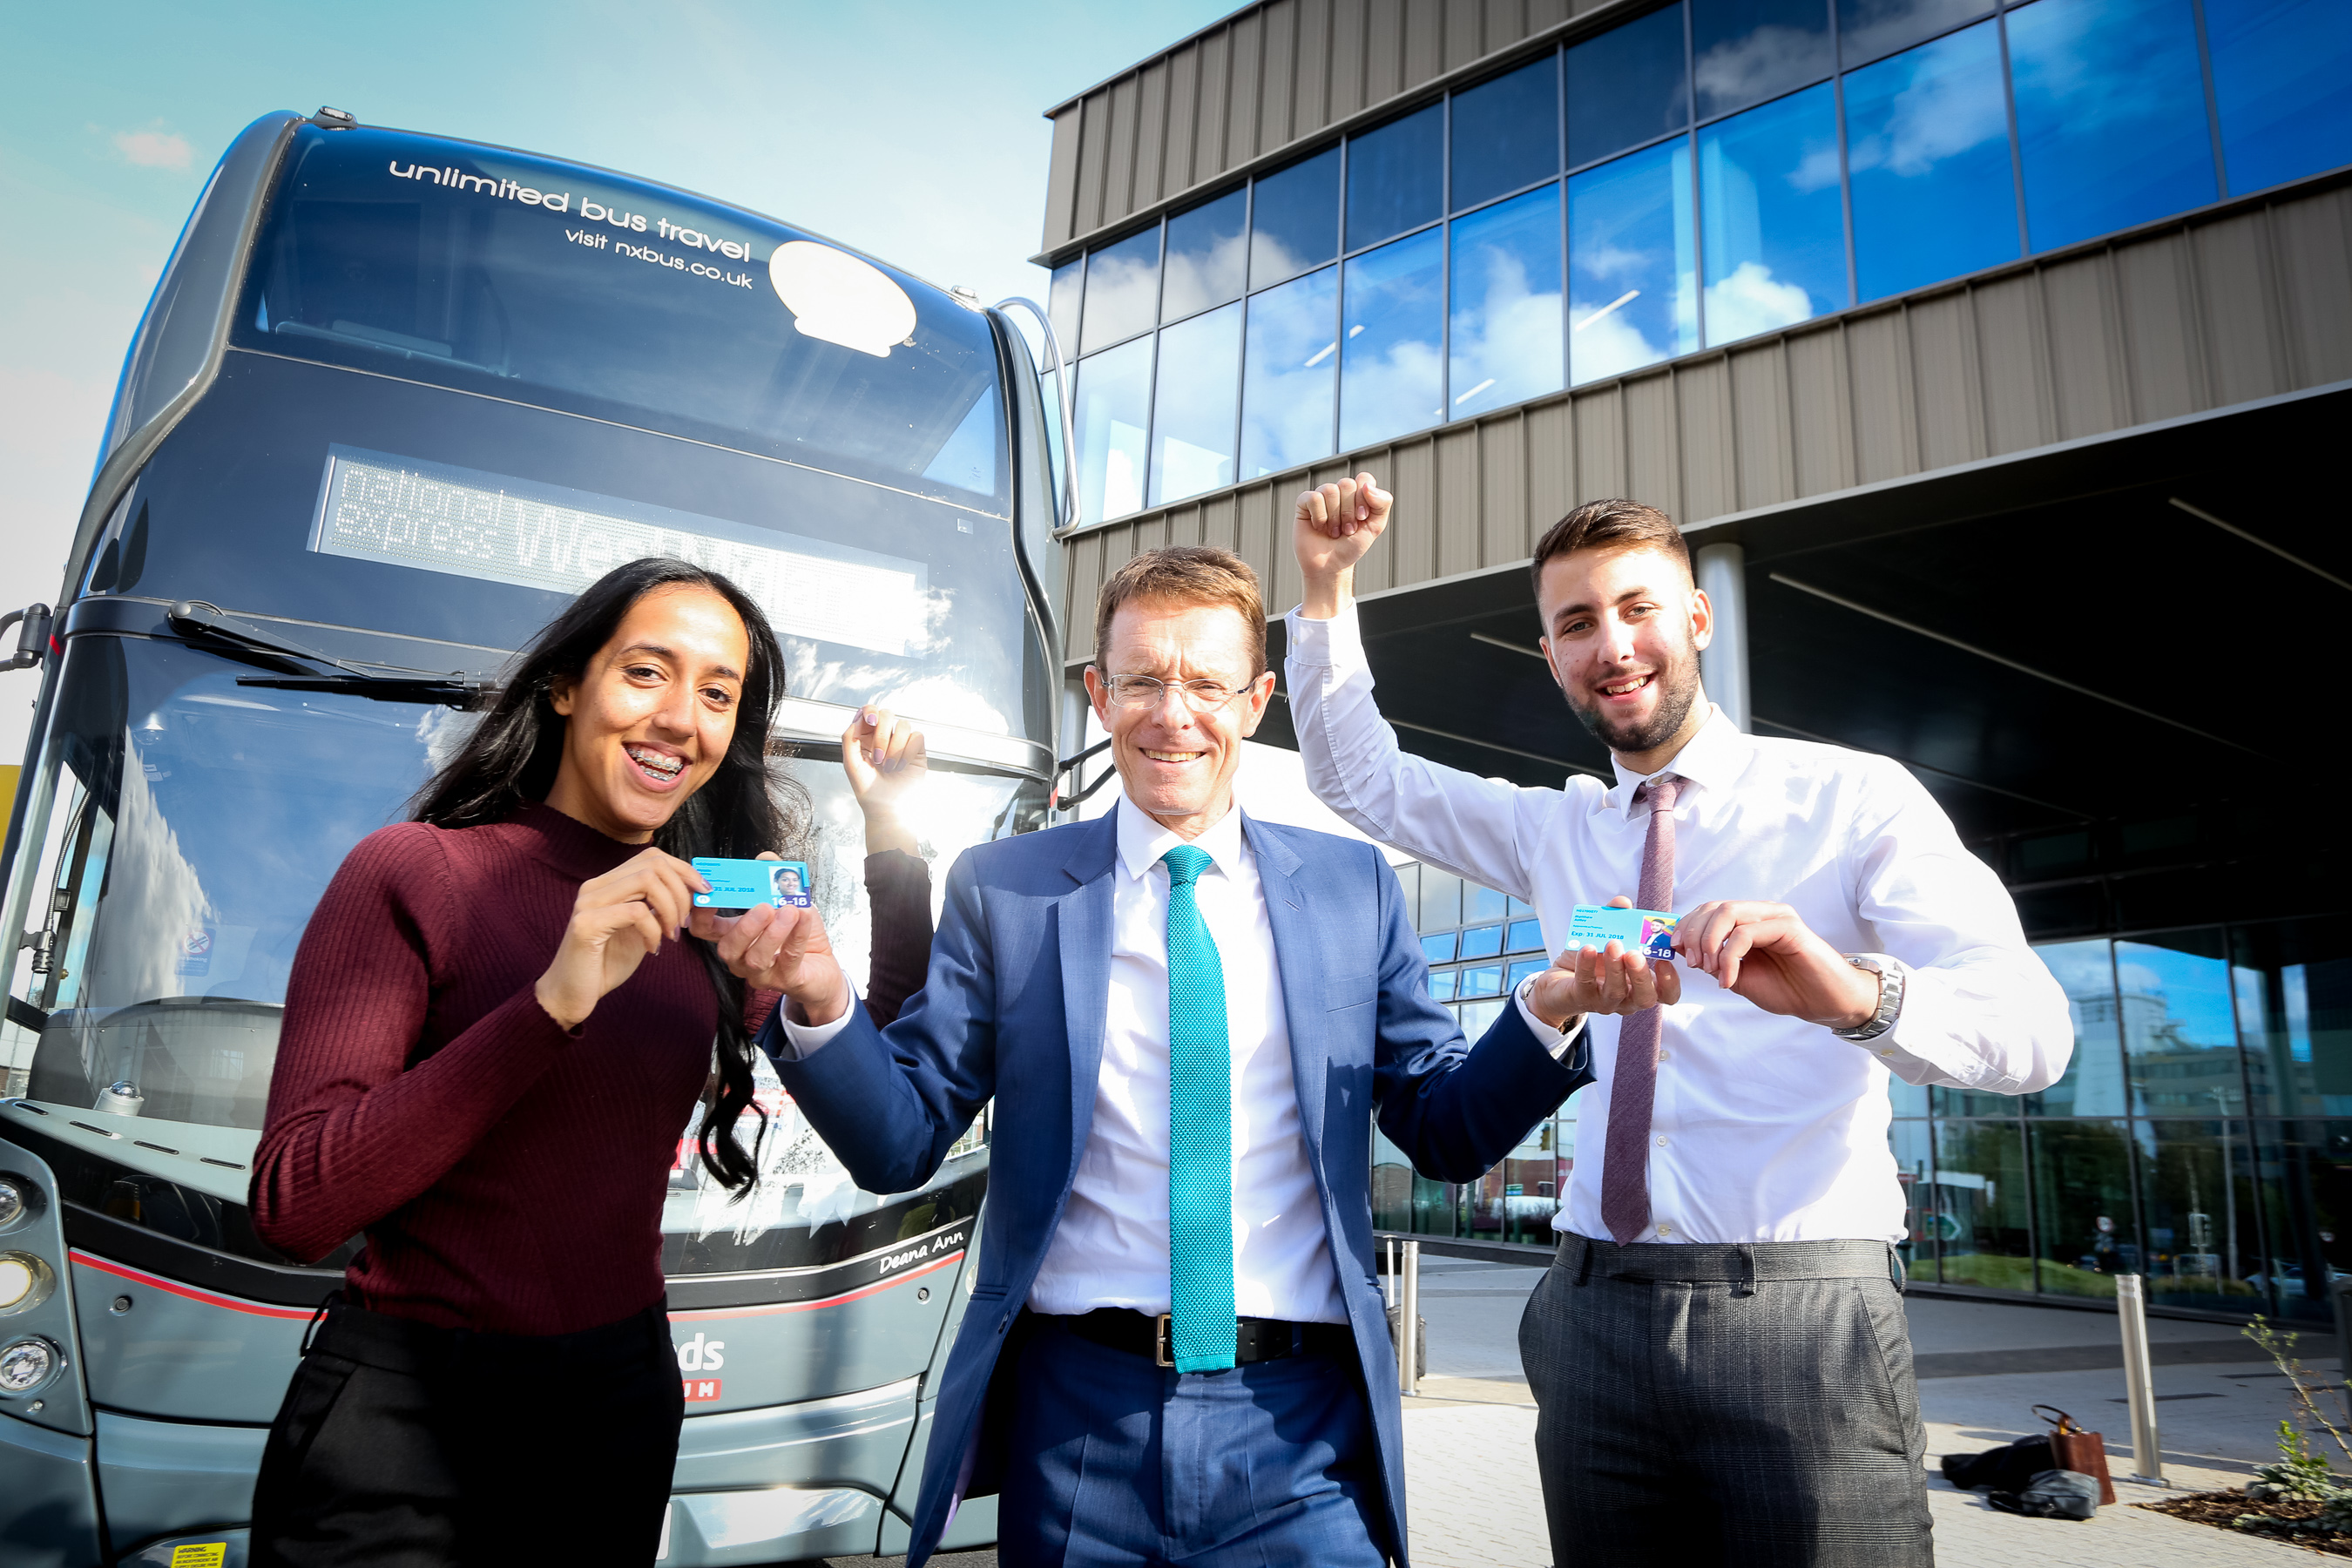 Mayor of the West Midlands Andy Street is pictured in the centre with apprentices Alyssia Samra and Matthew Astley, when half-price travel for all 16 to 18-year-olds was launched two years ago